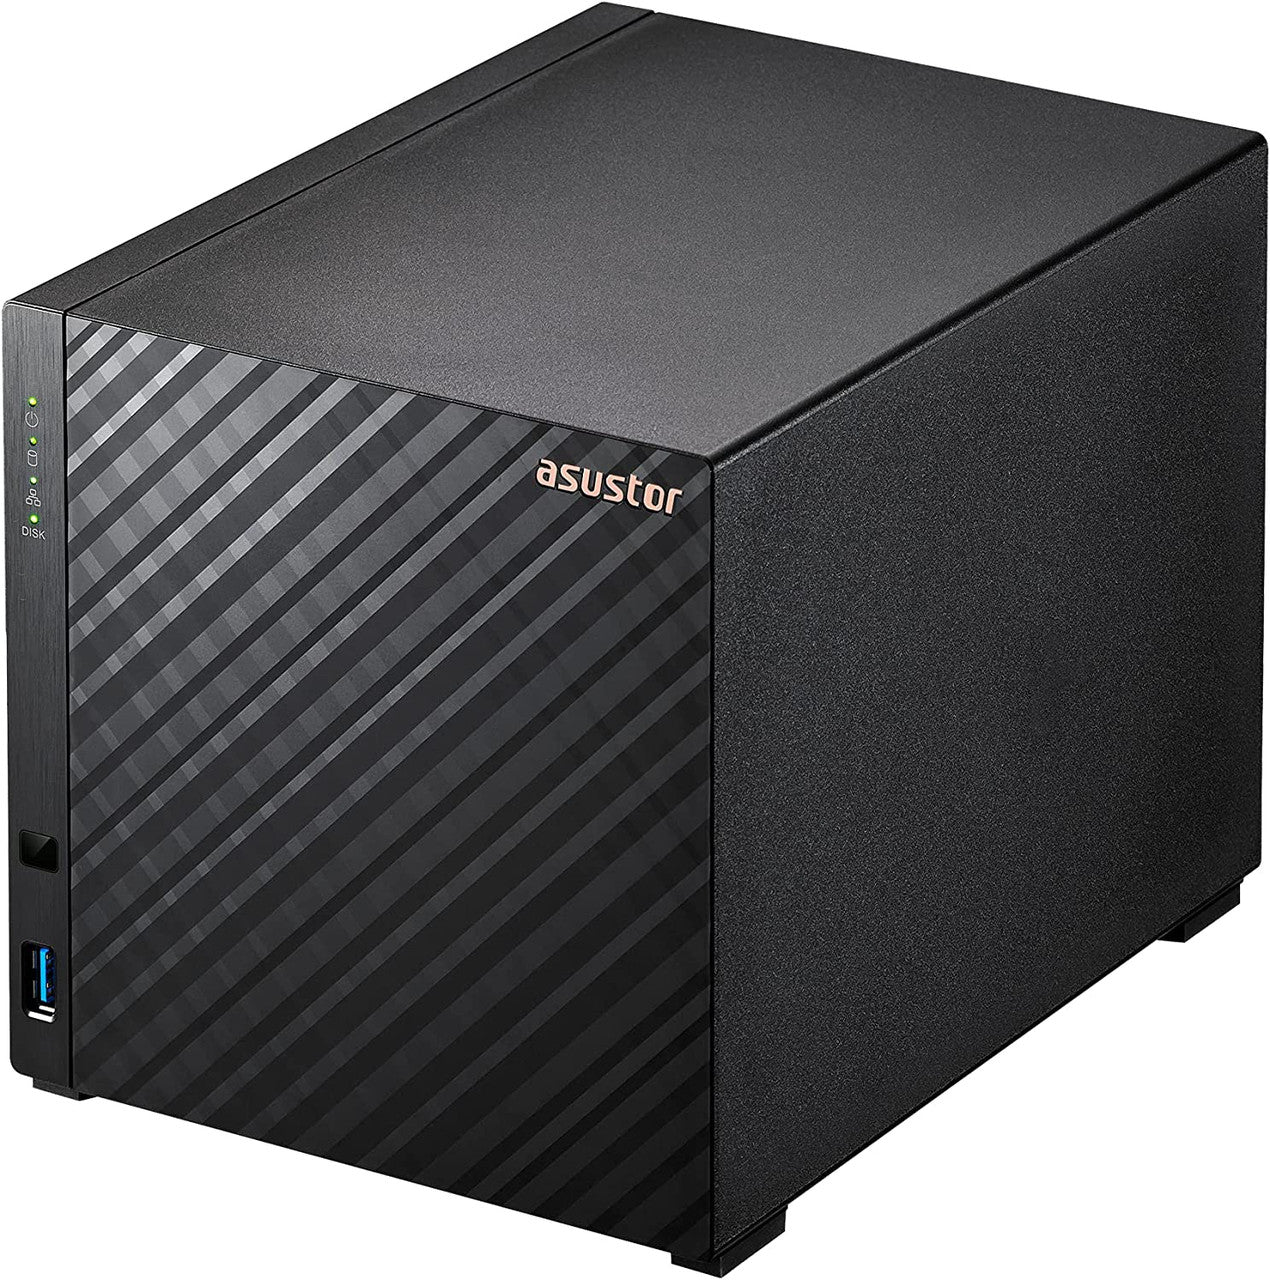 Asustor AS1104T 4-Bay Drivestor 4 NAS with 1GB RAM and 12TB (4x3TB) Seagate Ironwolf NAS Drives